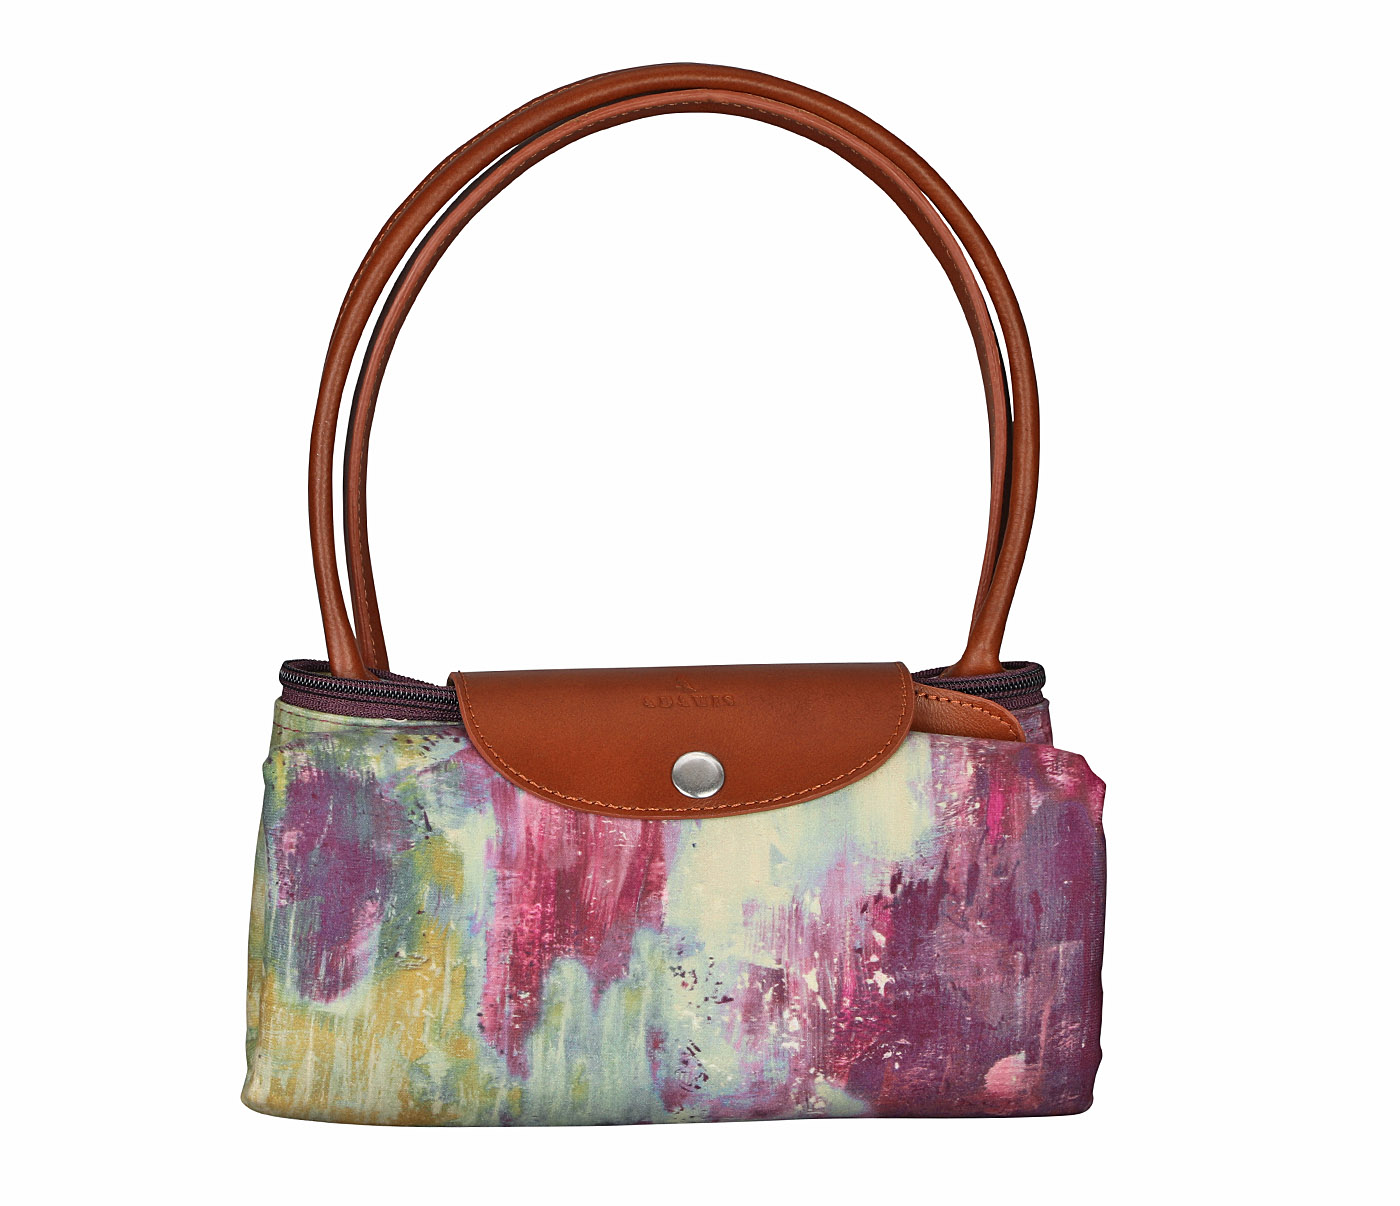 B881--Maite Folding tote in Abstract print material with genuine leather handles and flap - Wine